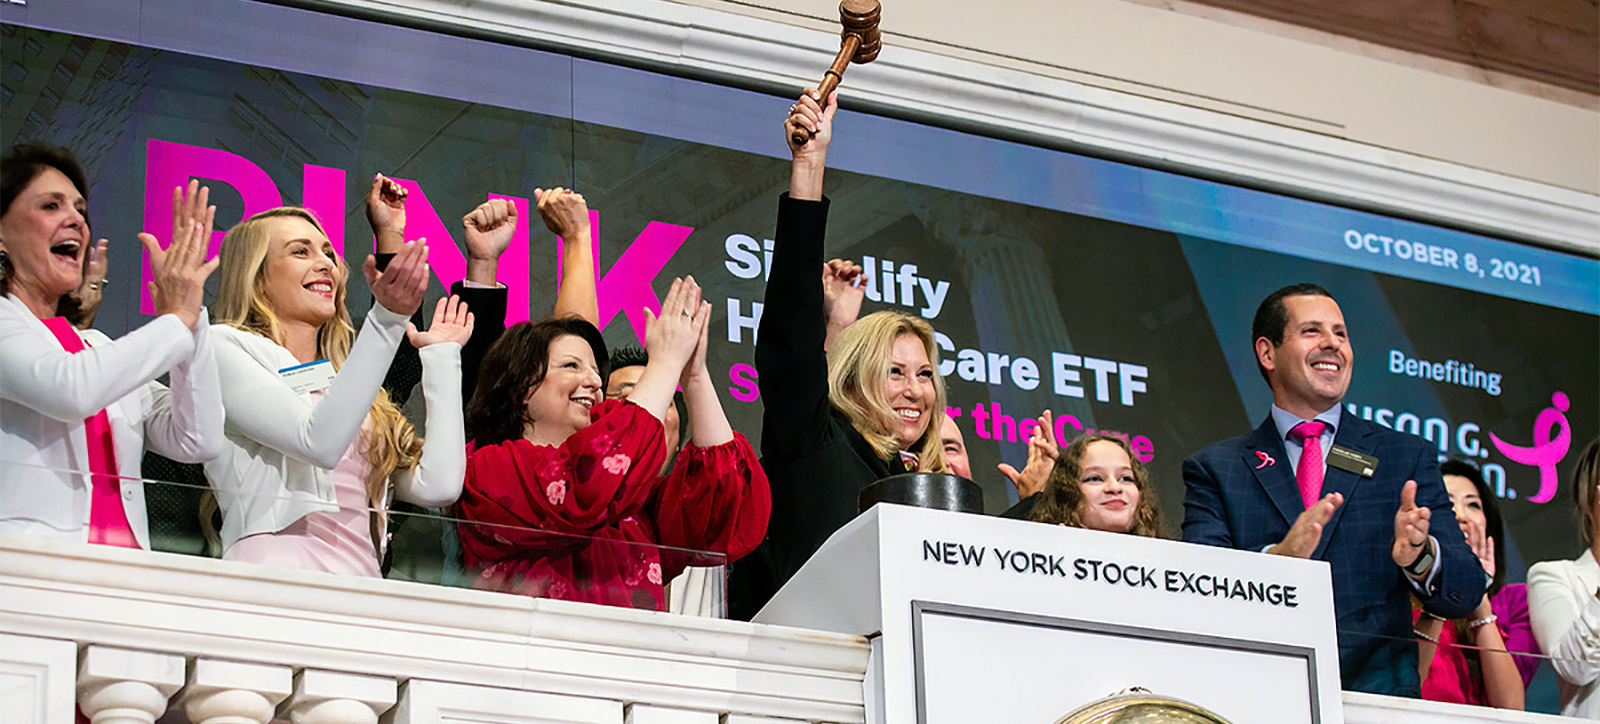 Ronja Lodmark (second from left) and colleagues ring the bell at the New York Stock Exchange